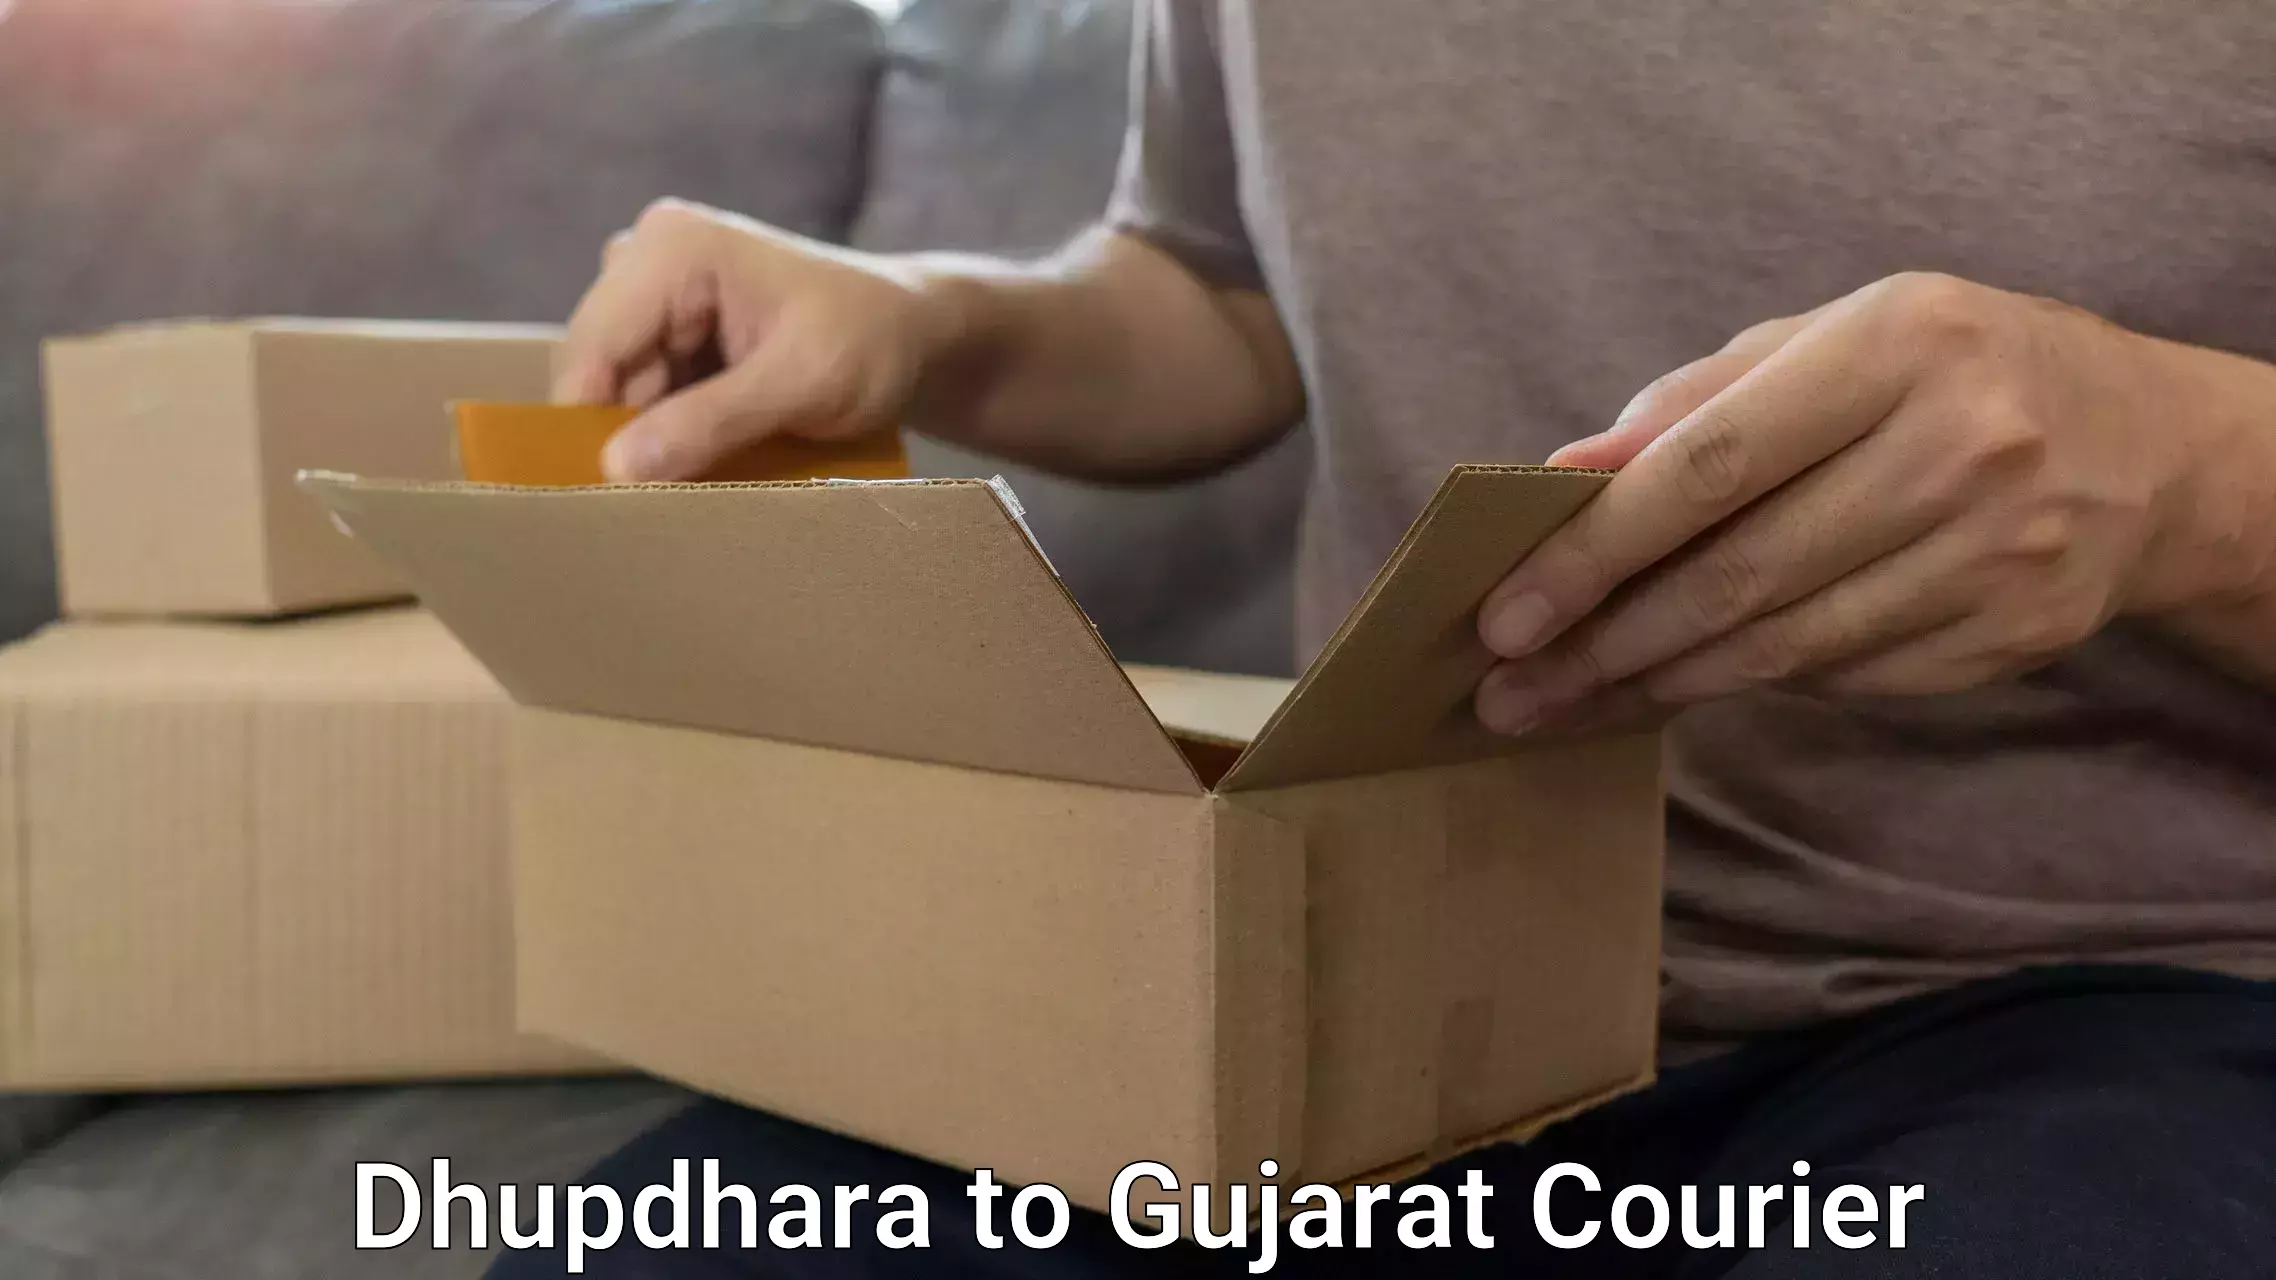 Instant baggage transport quote Dhupdhara to Kheda